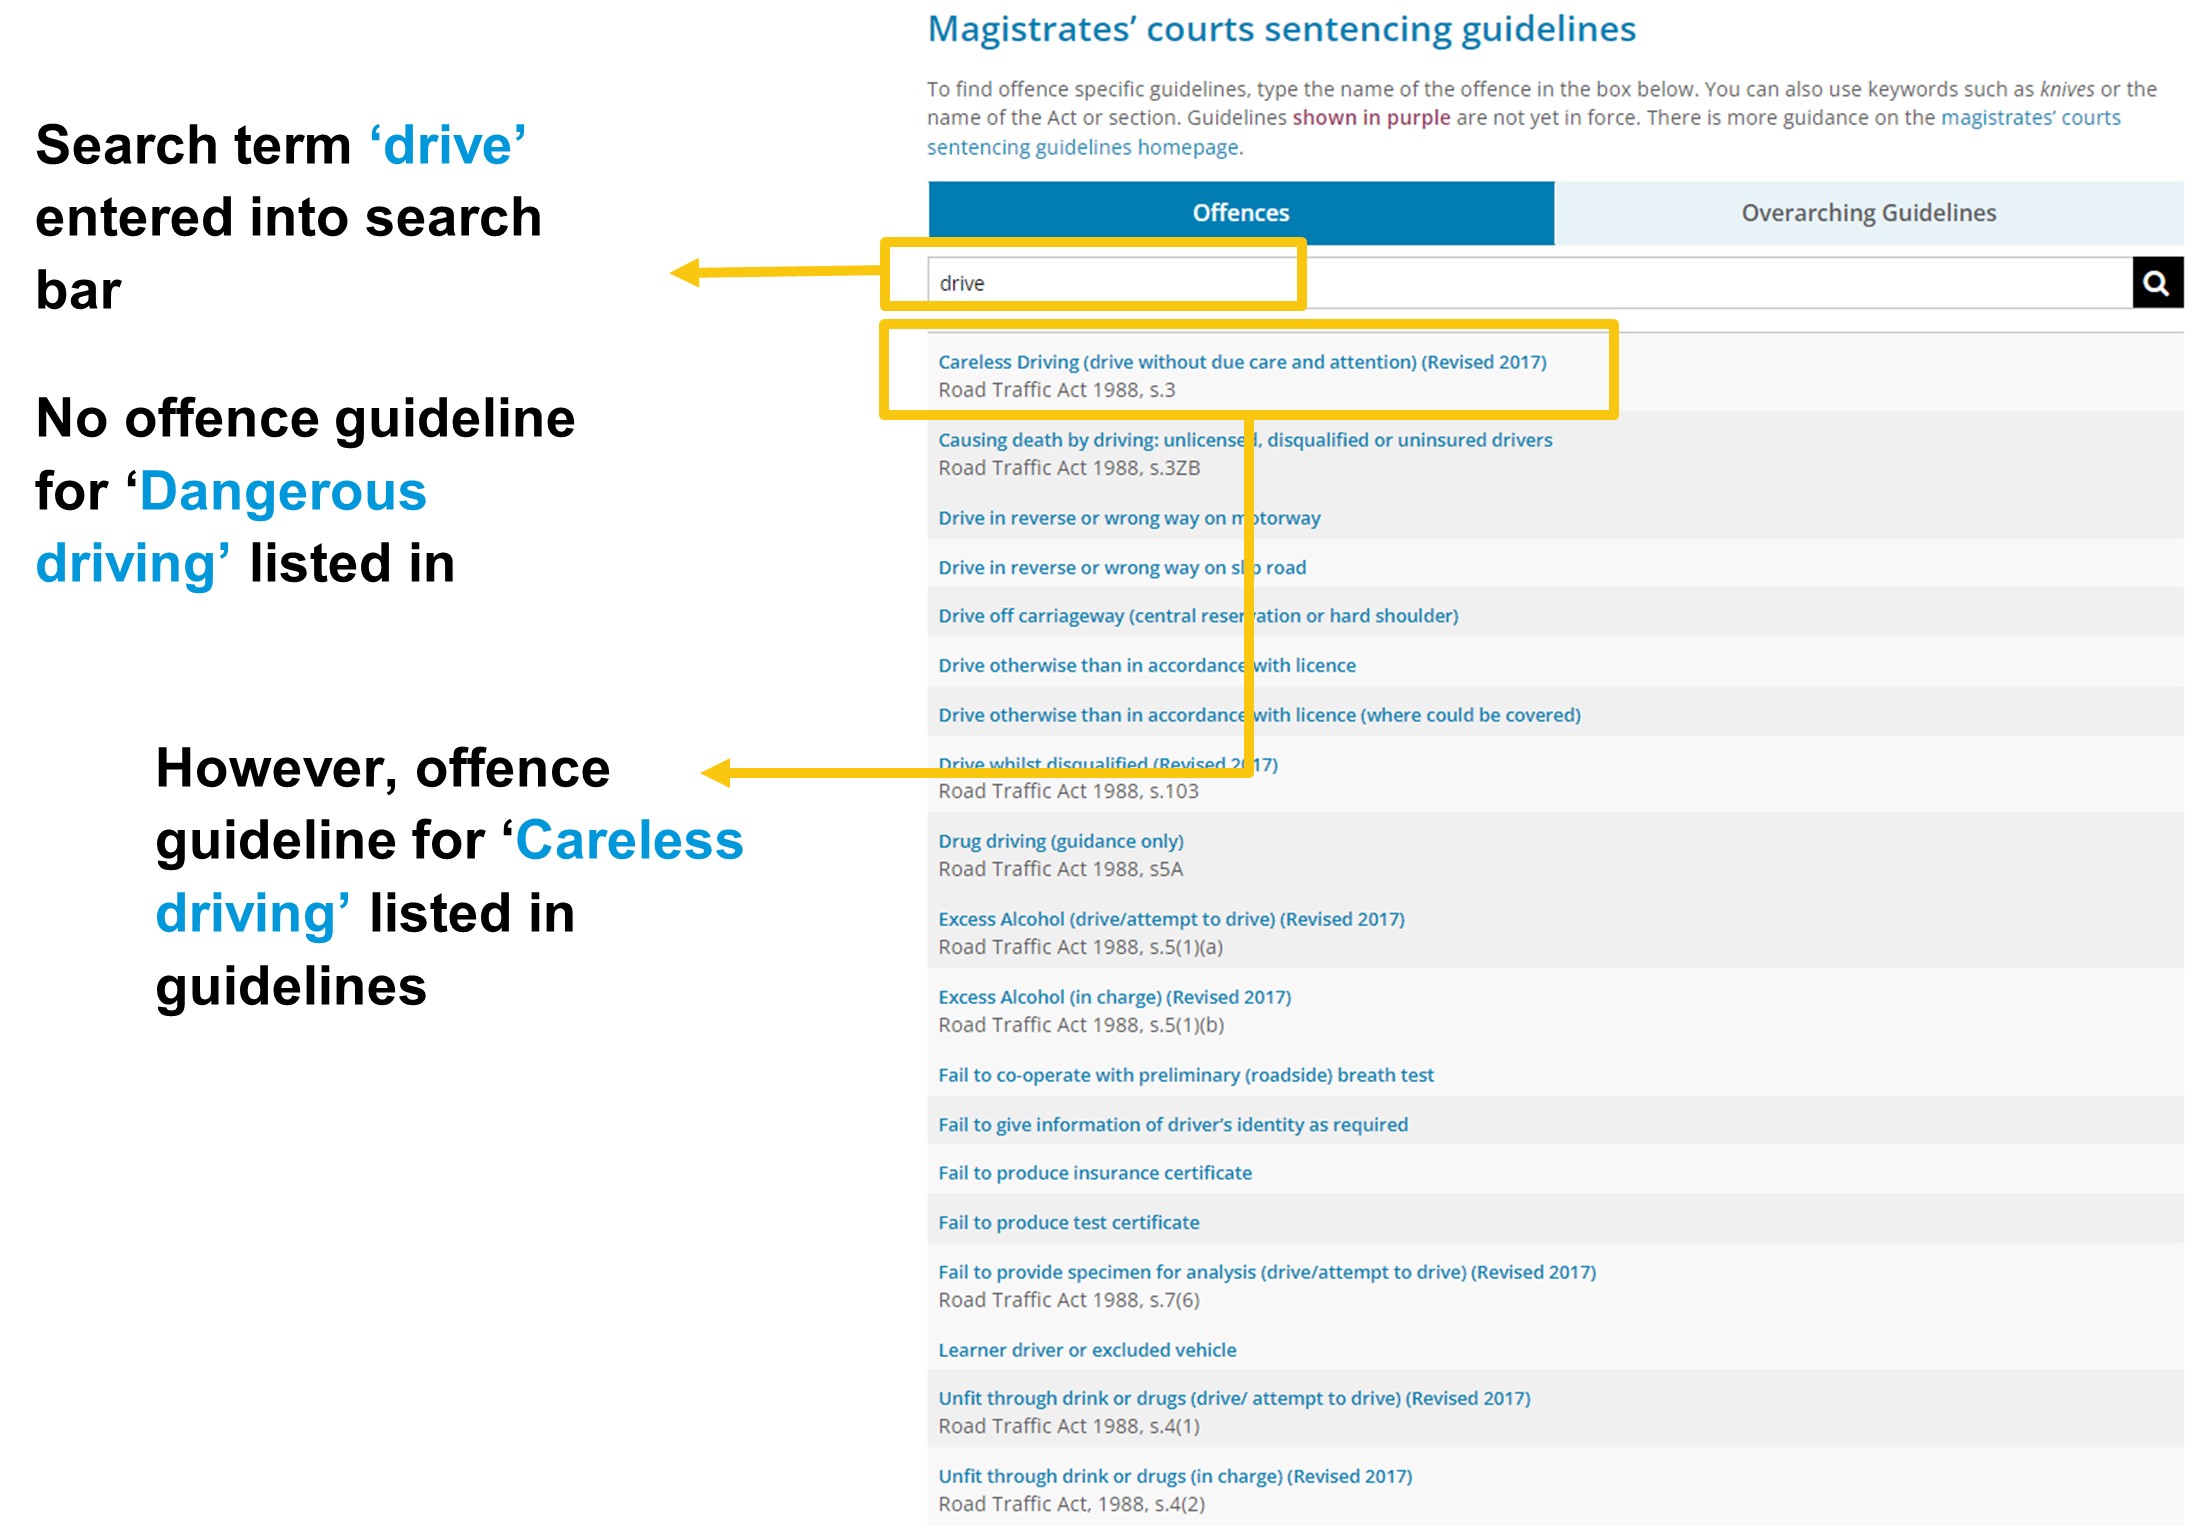 Image showing how entering the term "drive" into the guideline search bar does not return a result for "dangerous driving" but does for "careless driving"